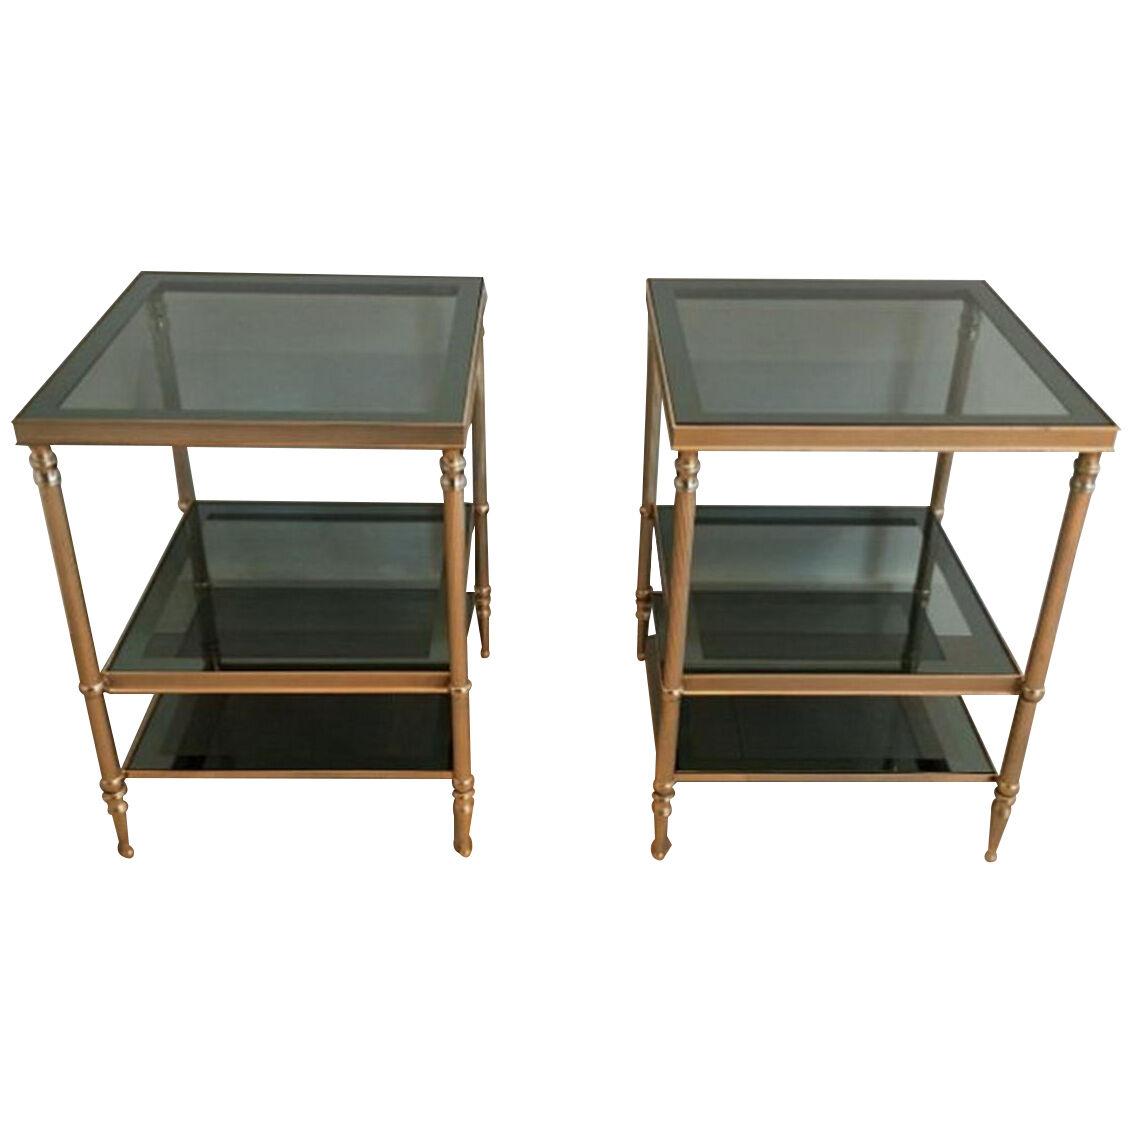 CIRCA 1940 Pair of Three Tiered Jansen Style Side Tables